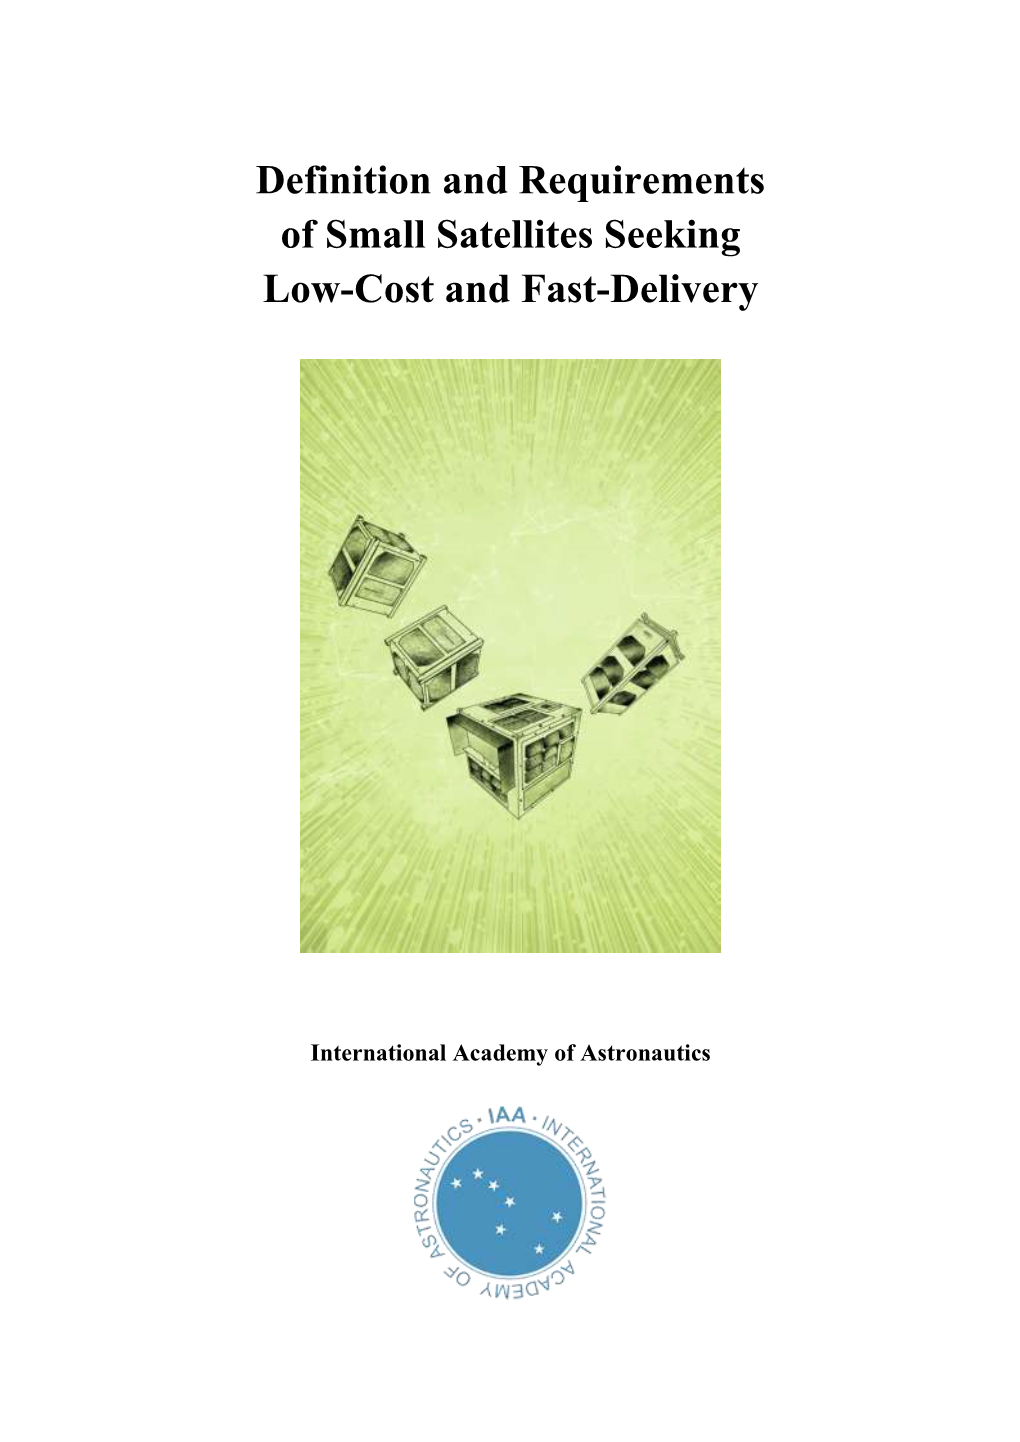 Definition and Requirements of Small Satellites Seeking Low-Cost and Fast-Delivery